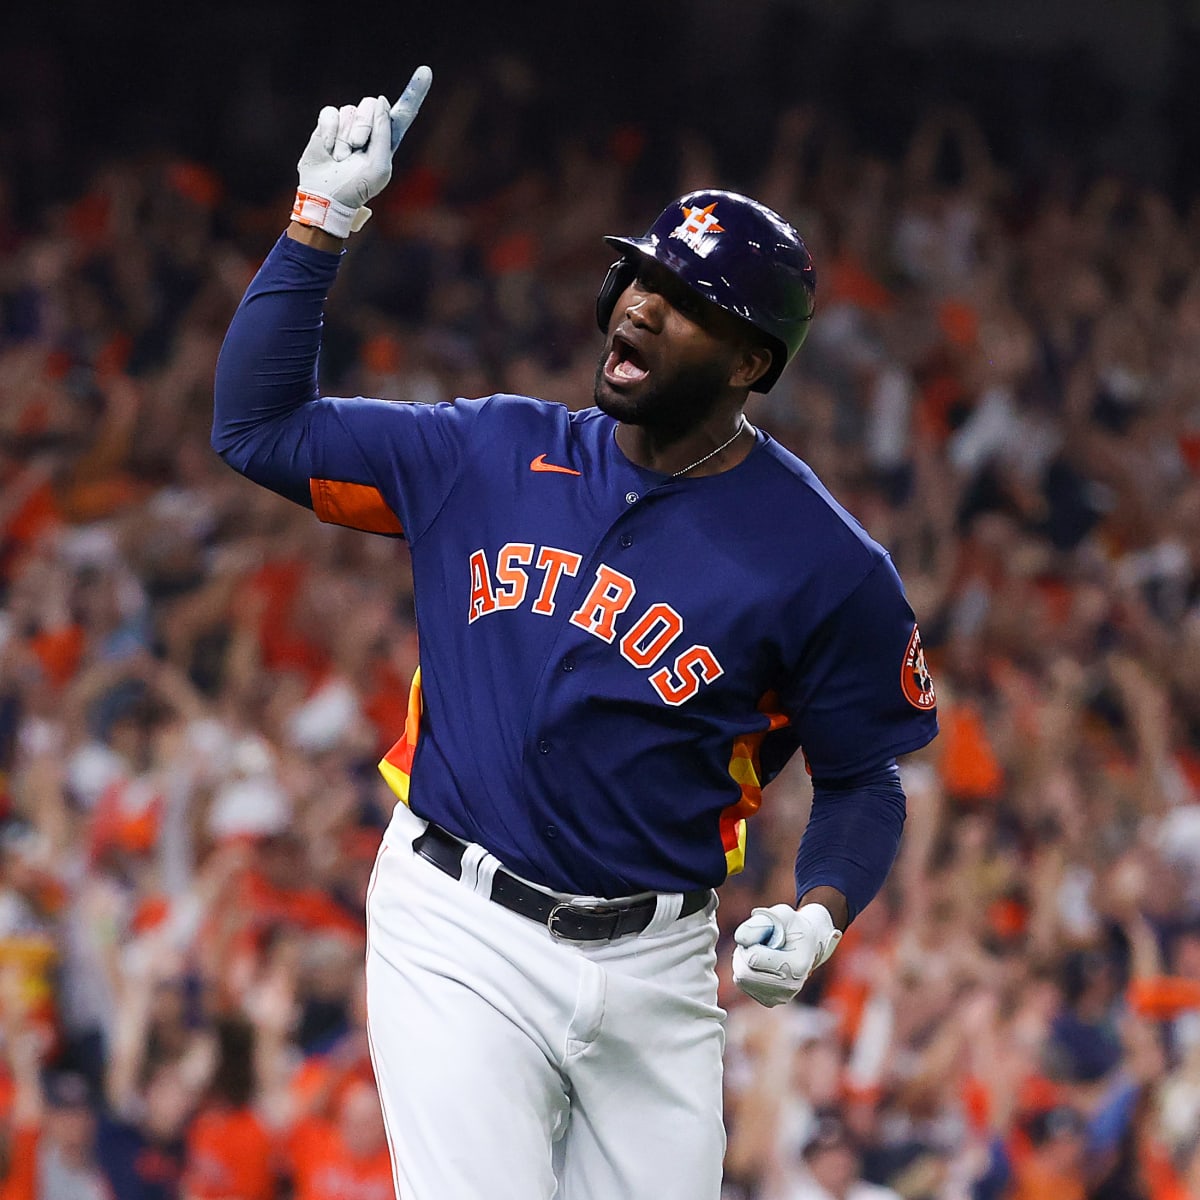 Houston Astros fans rejoice as Yordan Alvarez launches a 3-run homer to  take the lead in Game 6 of the World Series